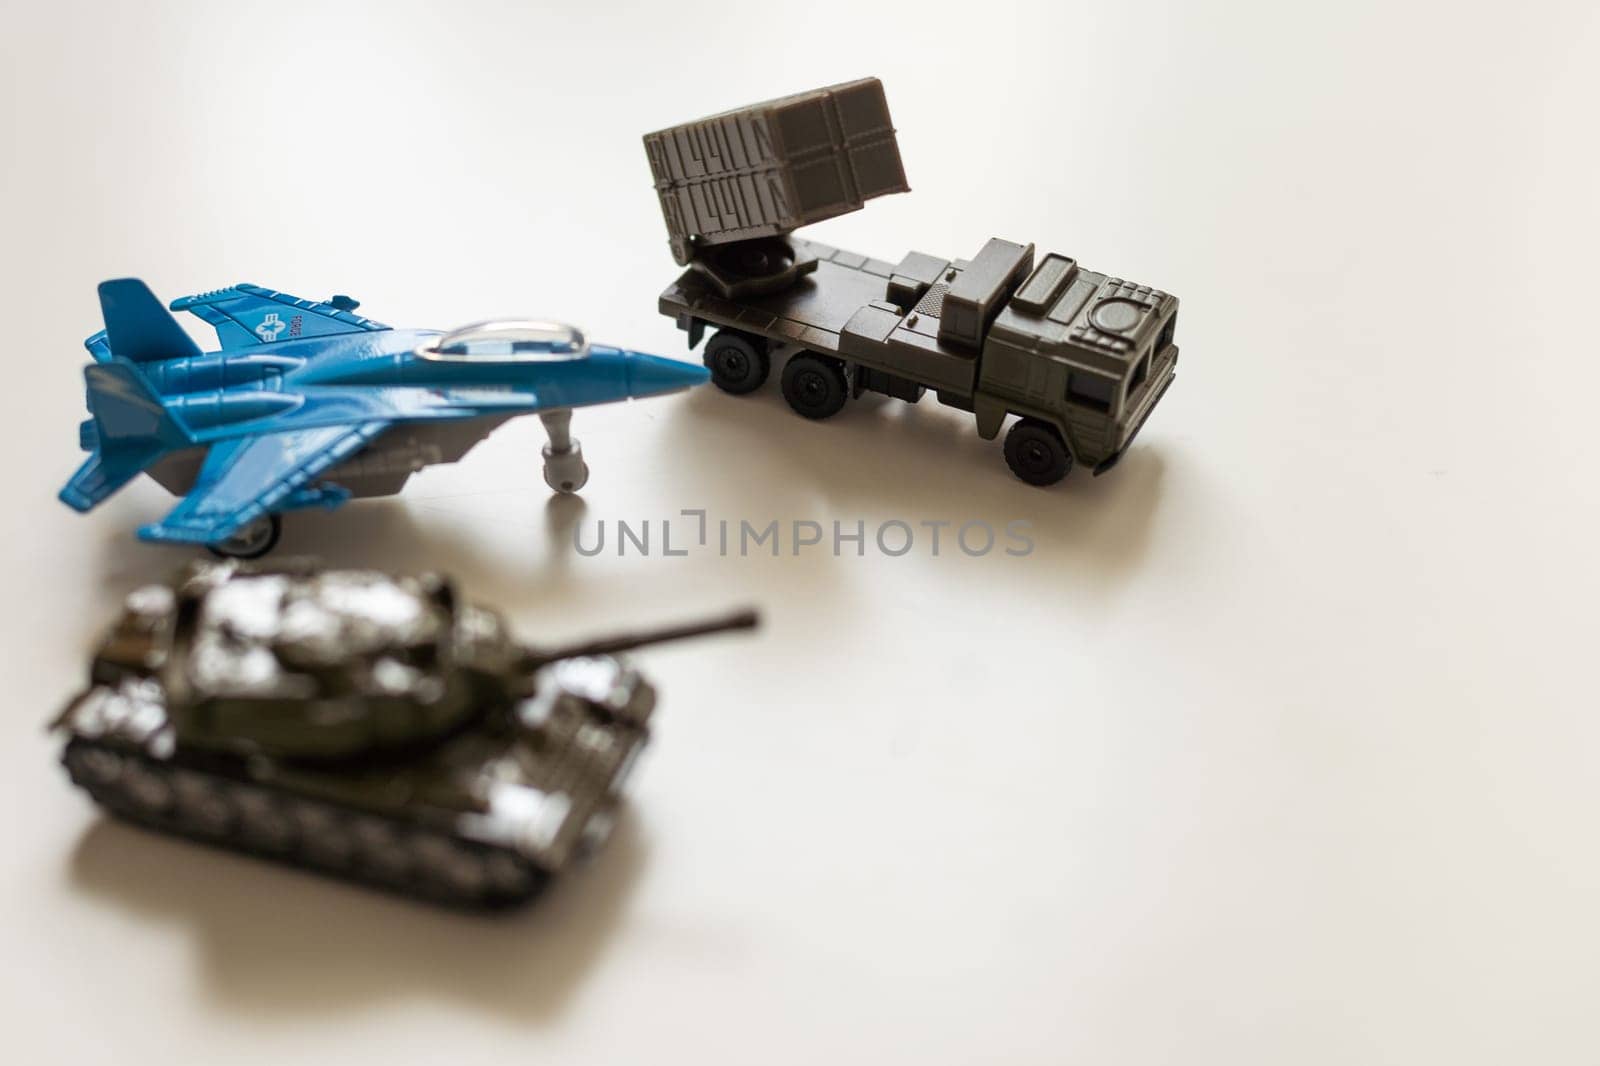 Plastic models of military equipment after assembly and painting by Andelov13